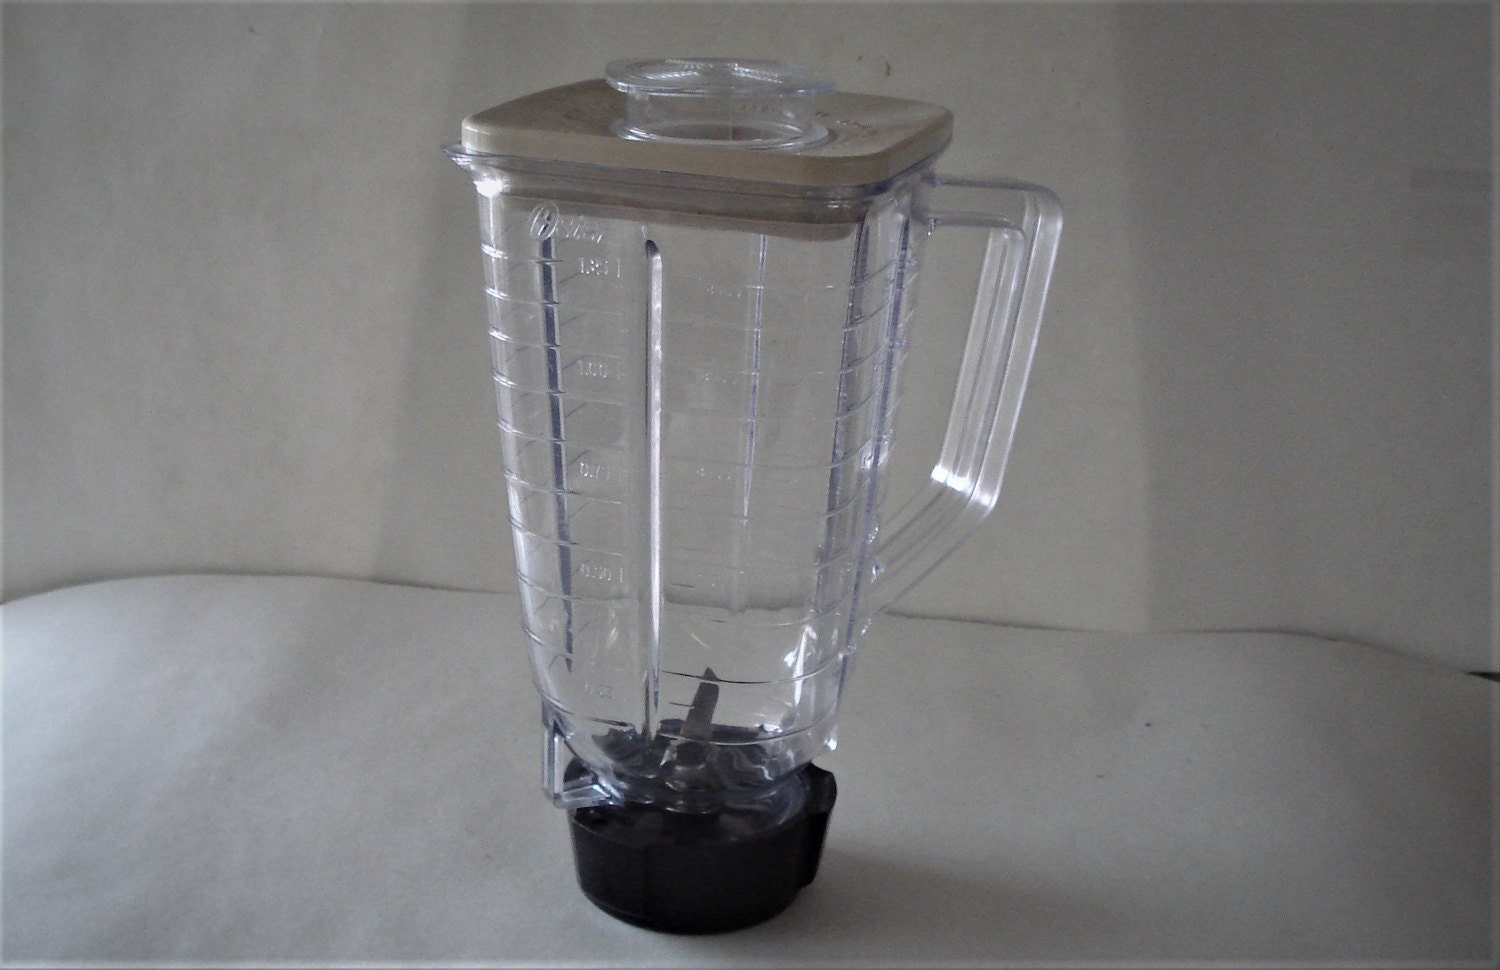 Oster Blender Glass Pitcher 5 Cup Jar W/Blade And Cover for 10 Speed Model  6630